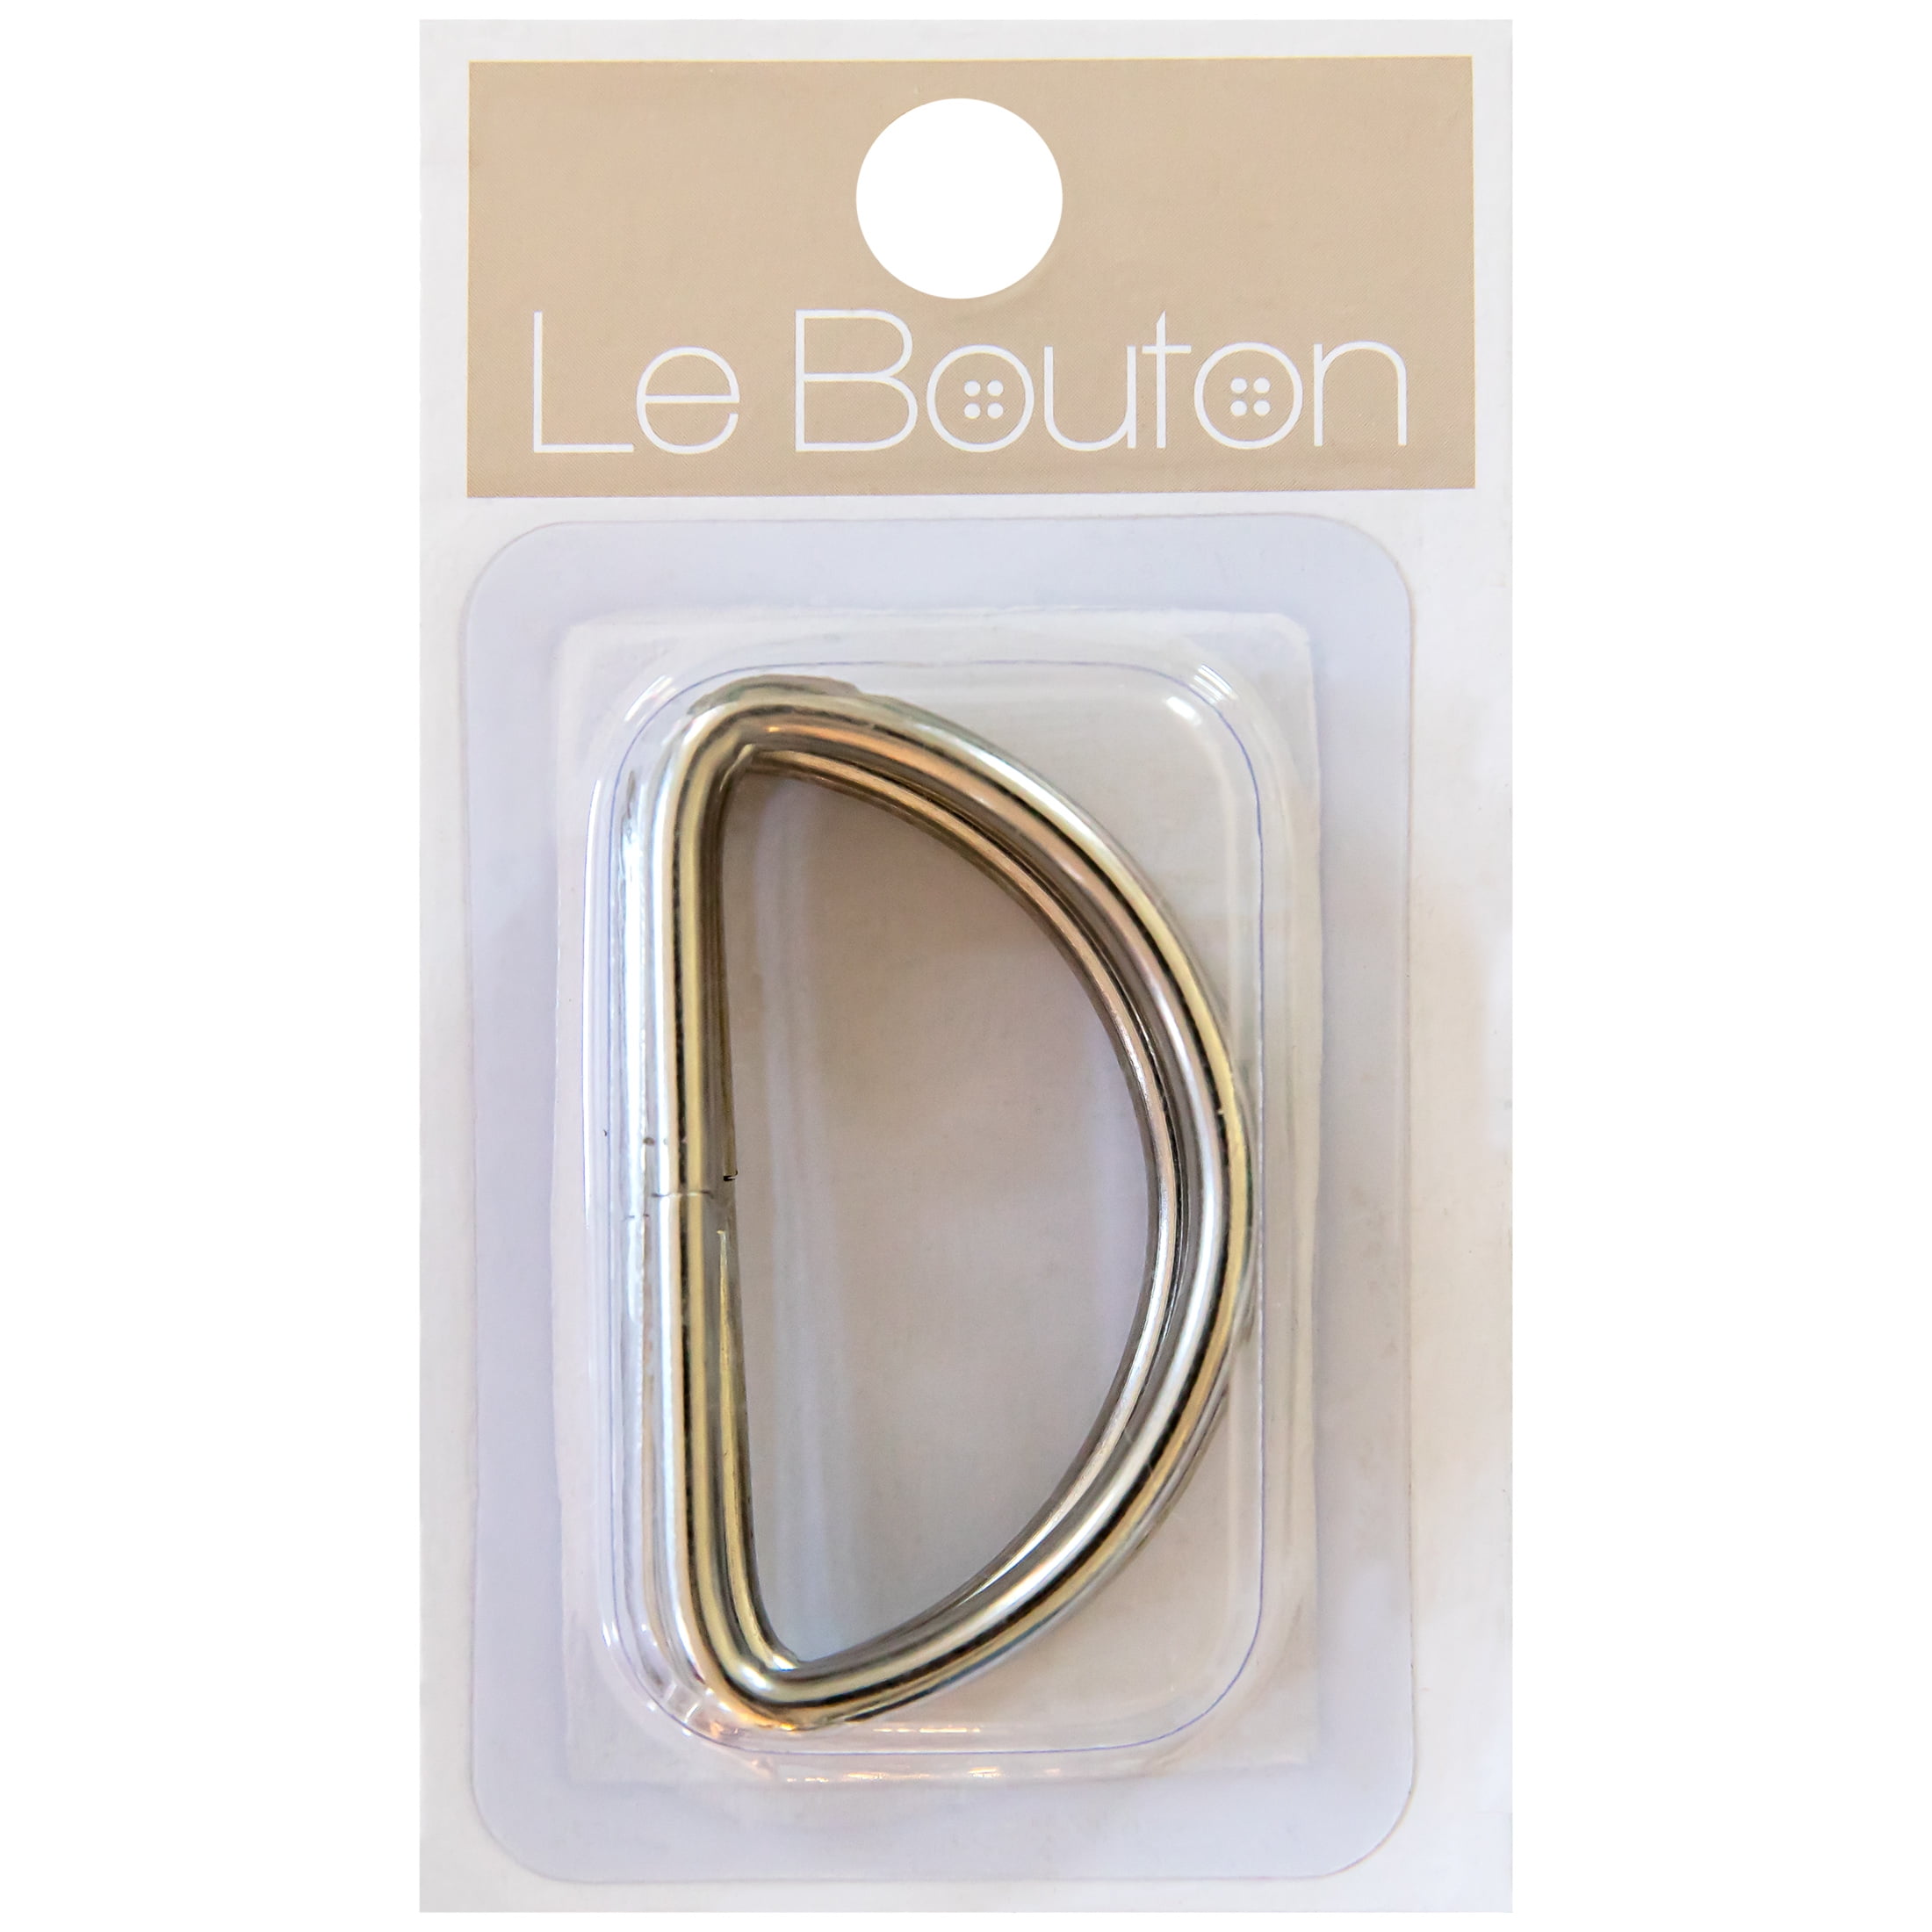 Le Bouton Silver 1 1/2" Metal D-Rings, 4 Pieces